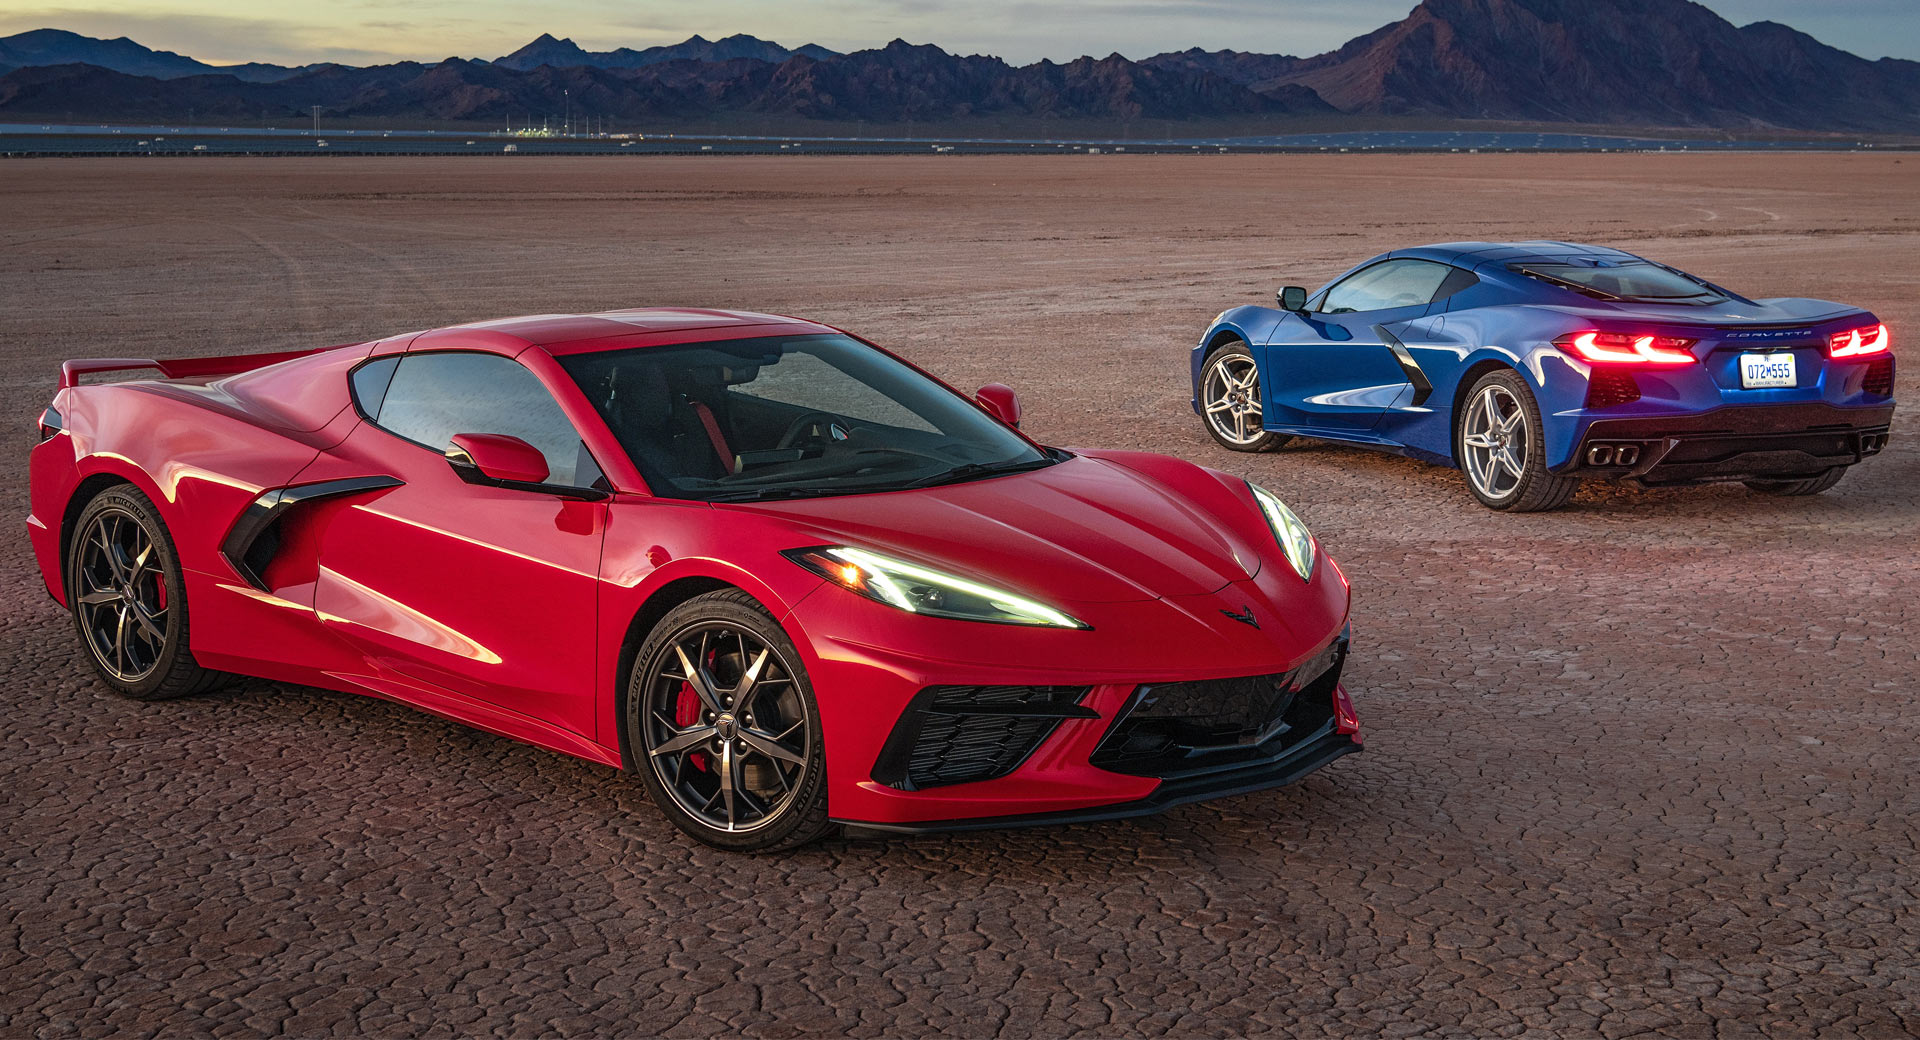 Chevy Recalling The Corvette C8 Over Its Frunk, Which Could Trap People